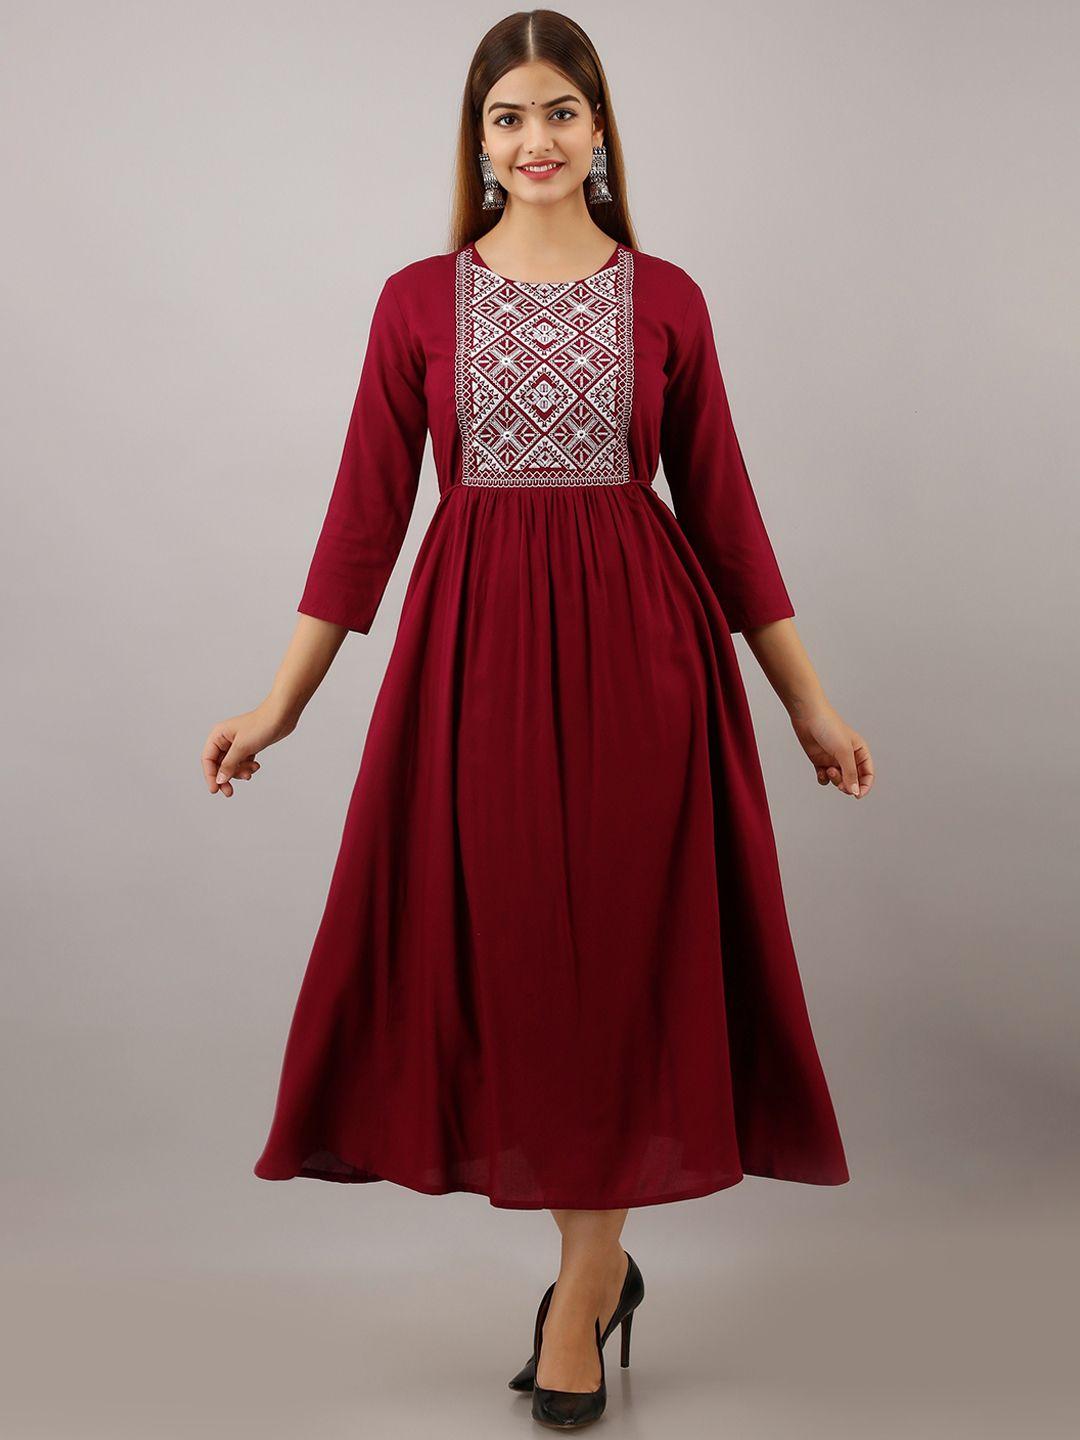 women touch maroon & white floral embroidered ethnic midi fit & flared dress